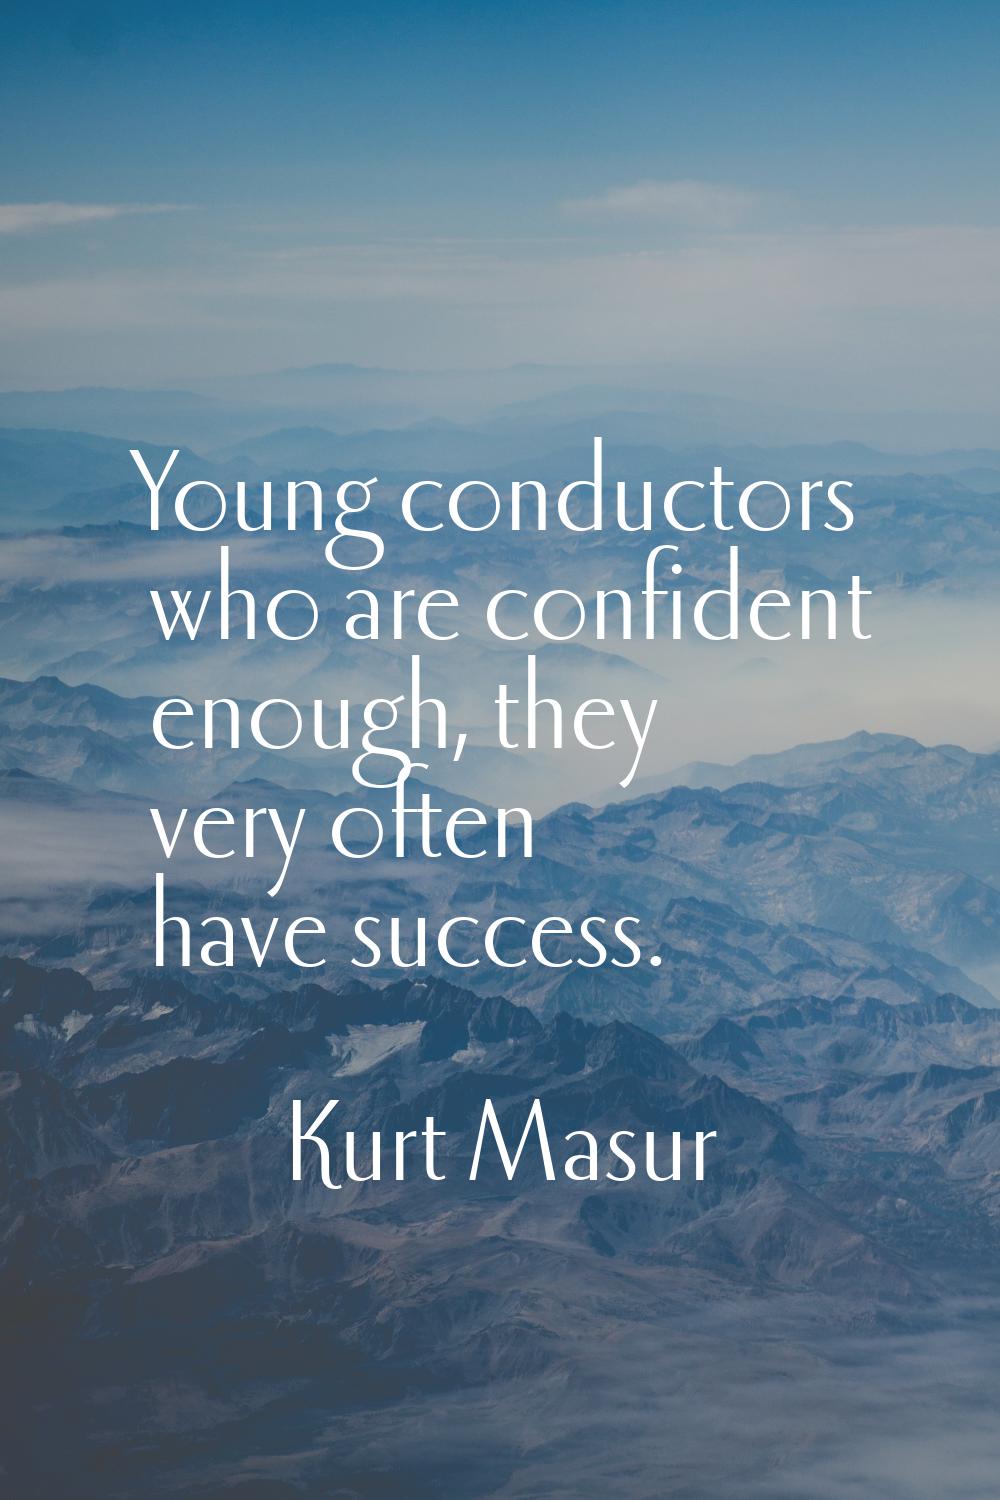 Young conductors who are confident enough, they very often have success.